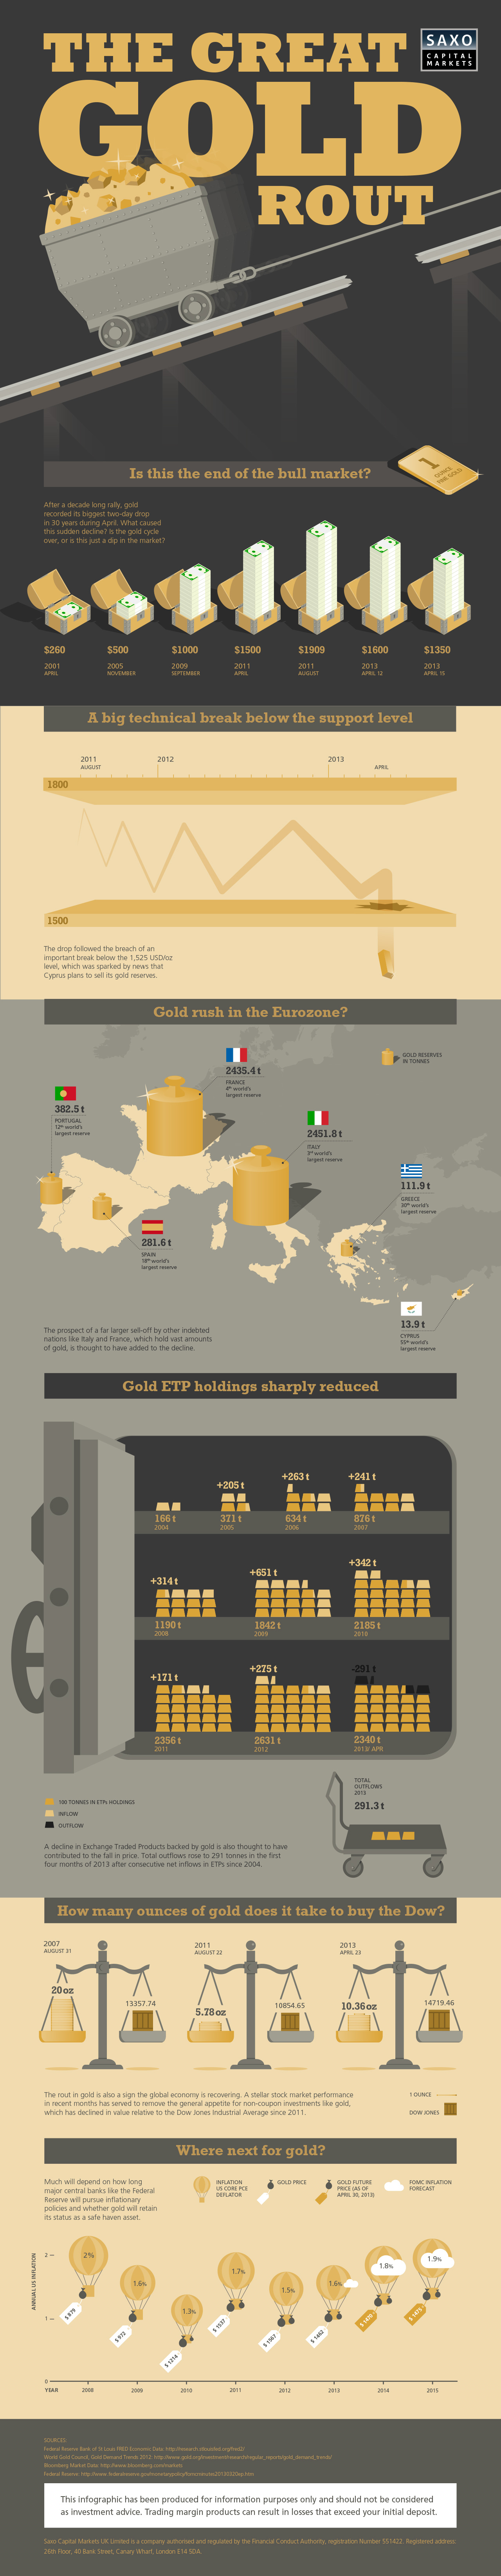 gold-rout-infographic